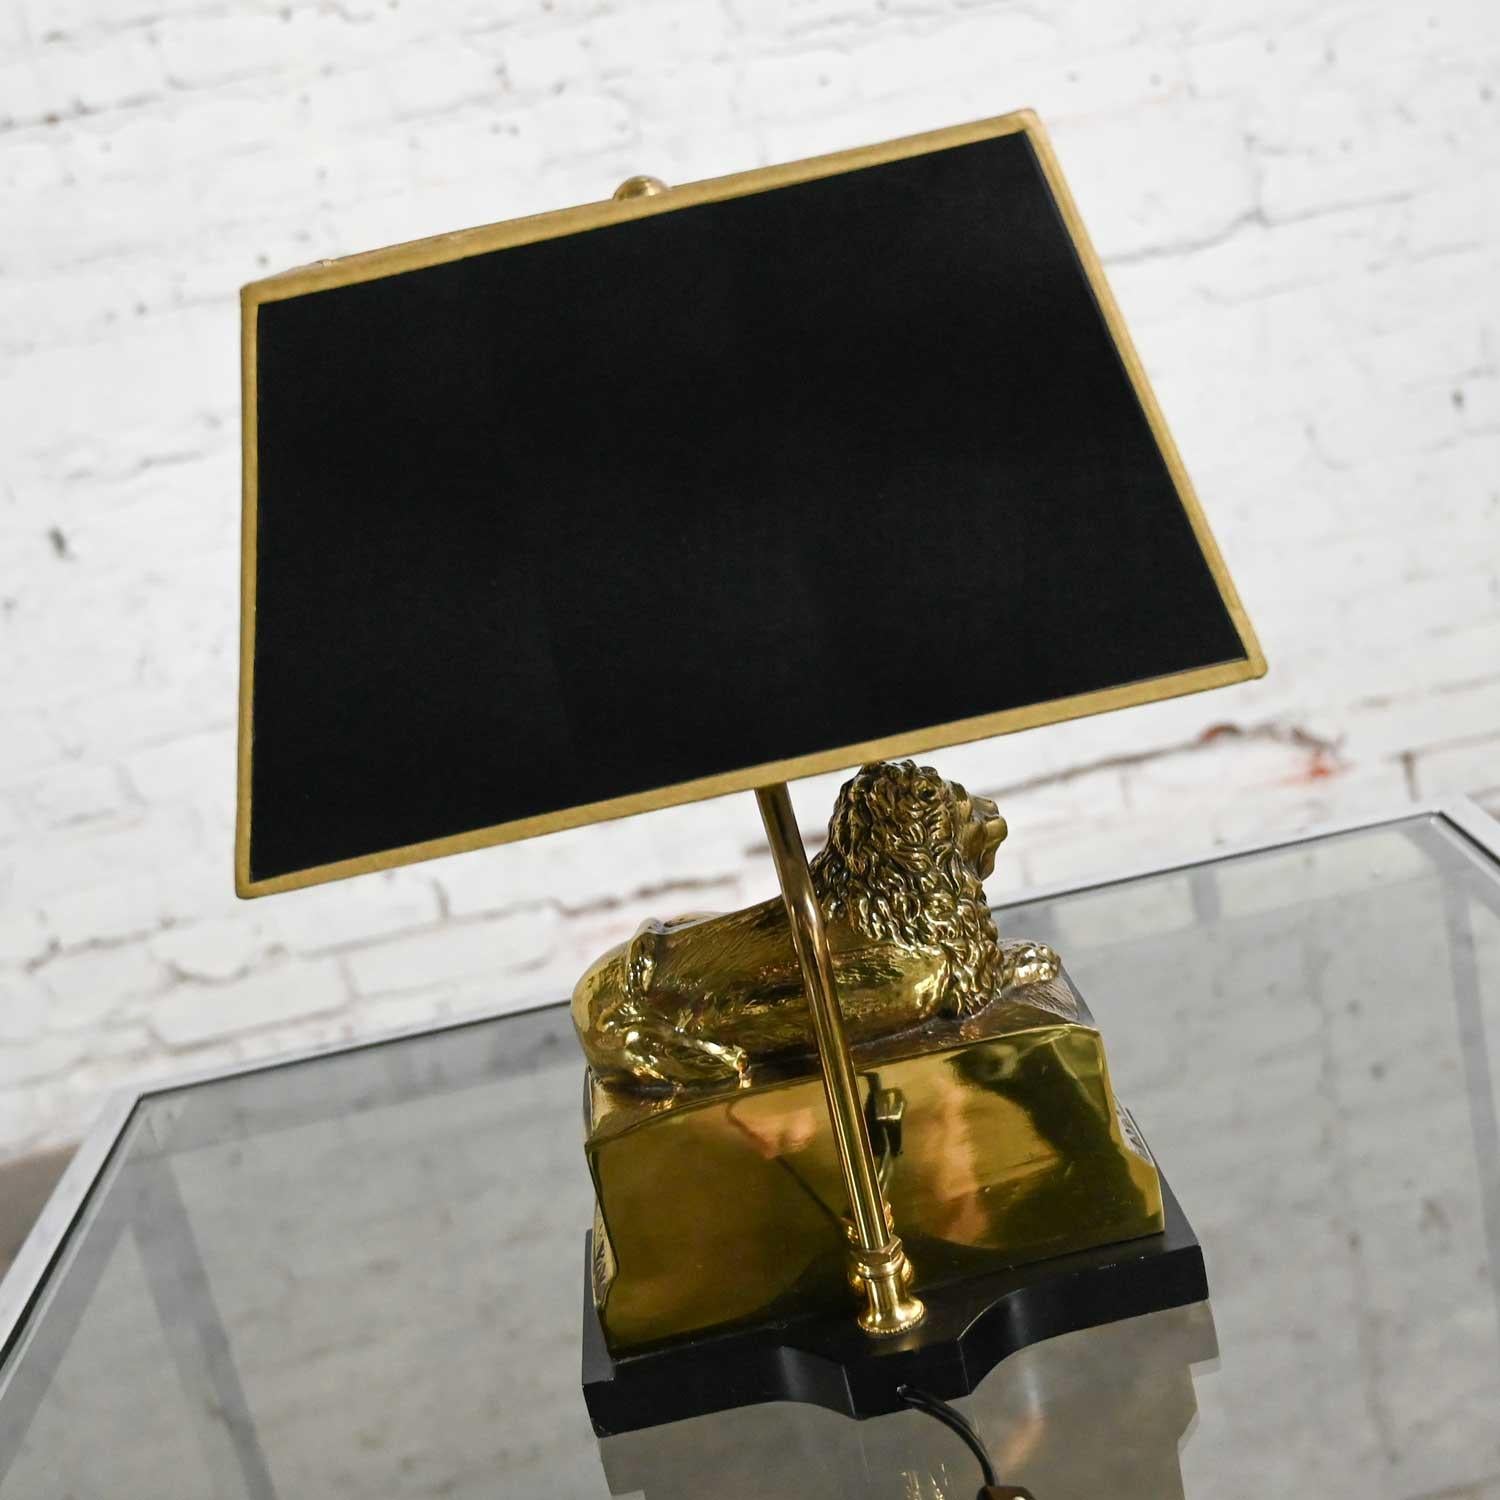 Vintage Neoclassic Brass Lion Low Desk Lamp Rectangular Black Shade In Good Condition For Sale In Topeka, KS